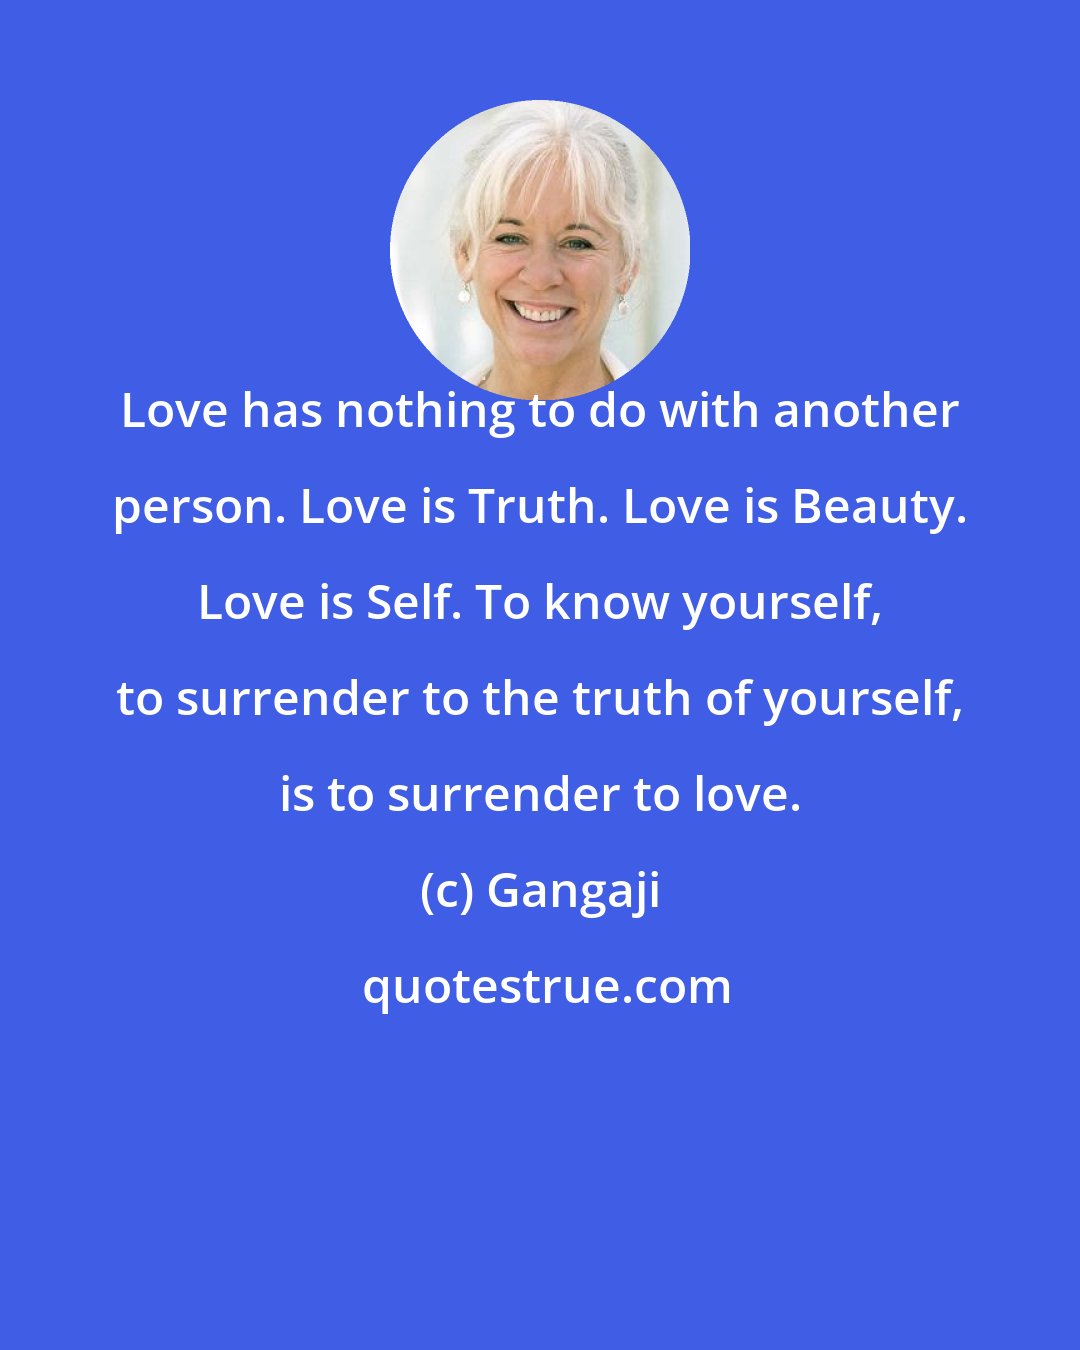 Gangaji: Love has nothing to do with another person. Love is Truth. Love is Beauty. Love is Self. To know yourself, to surrender to the truth of yourself, is to surrender to love.